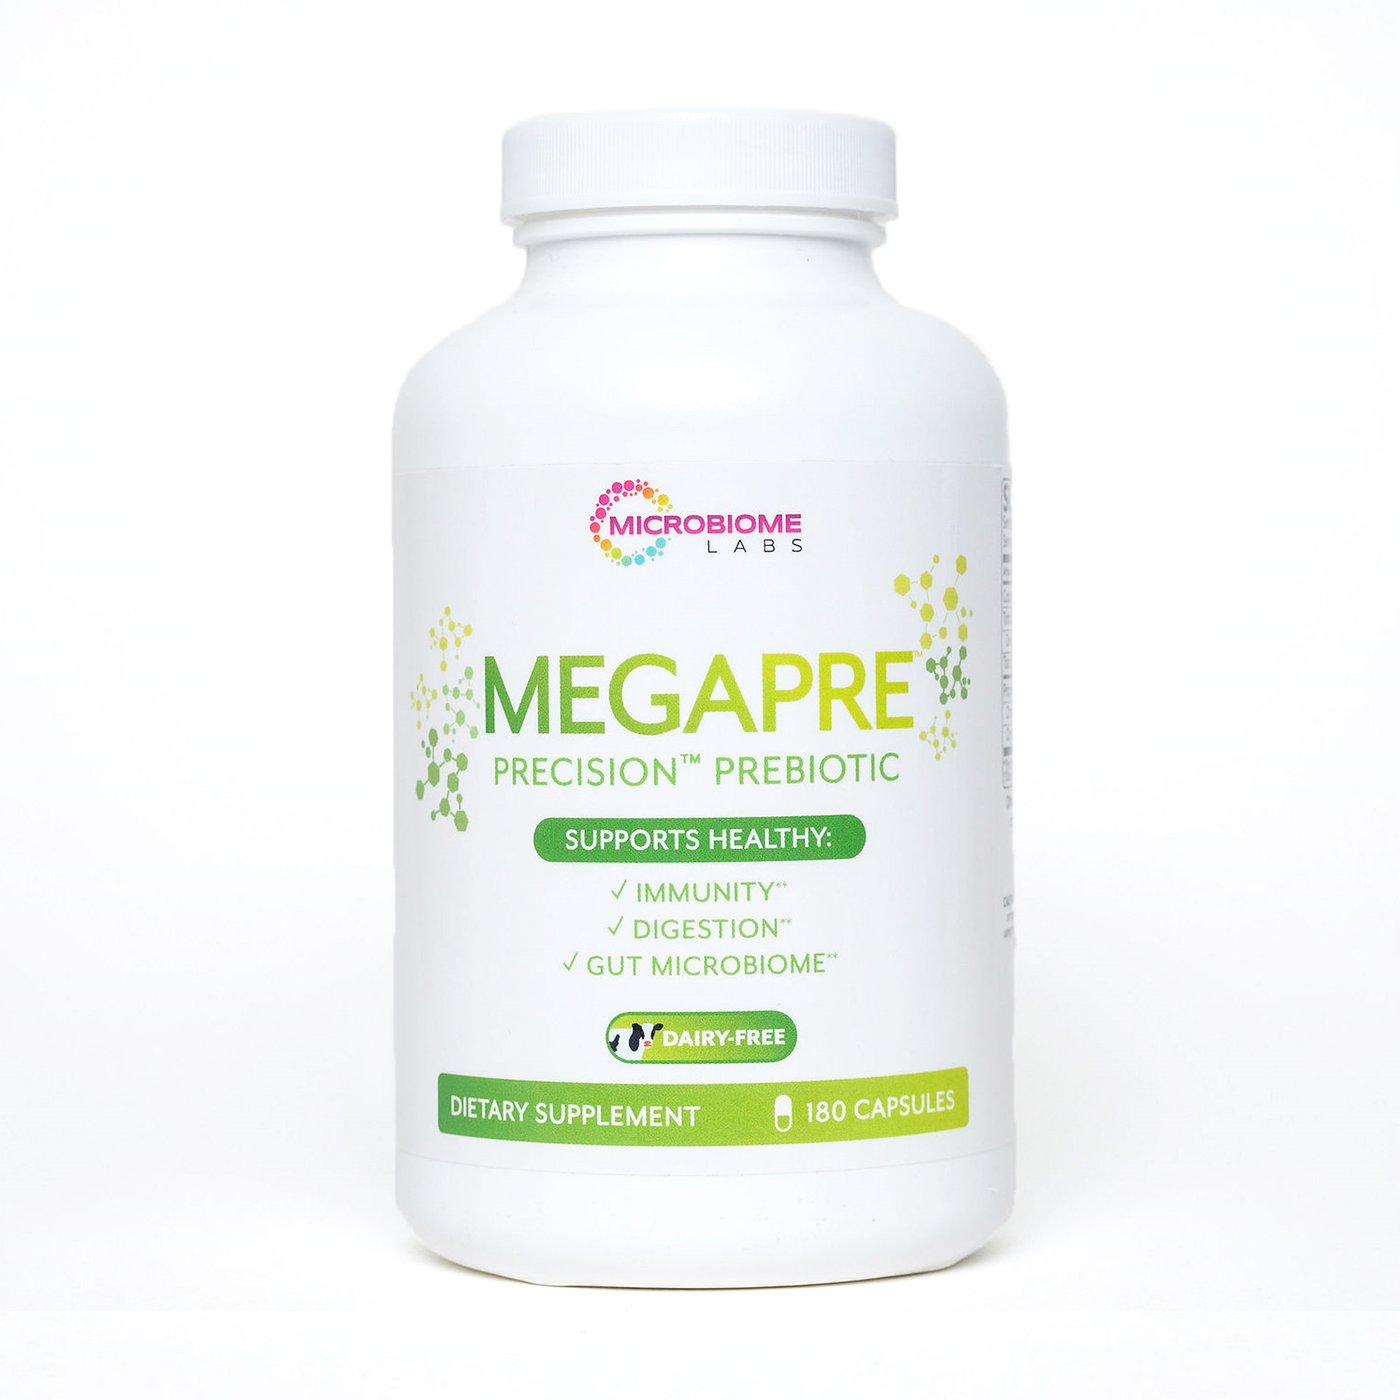 Megapre Dairy Free Capsules 180 caps Curated Wellness